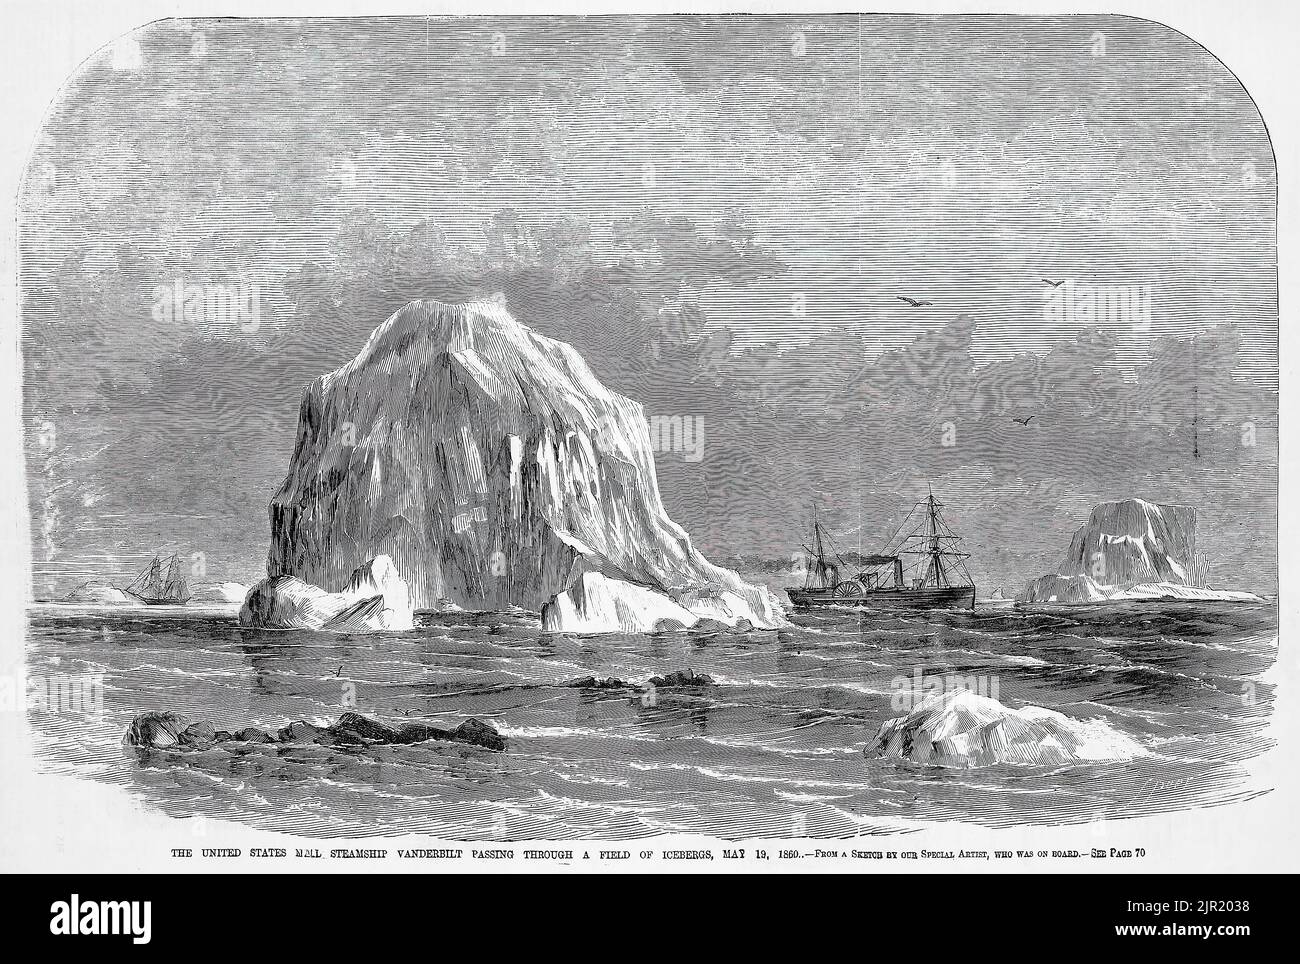 The United States Mail Steamship Vanderbilt passing through a field of icebergs, May 19th, 1860. 19th century illustration from Frank Leslie's Illustrated Newspaper Stock Photo